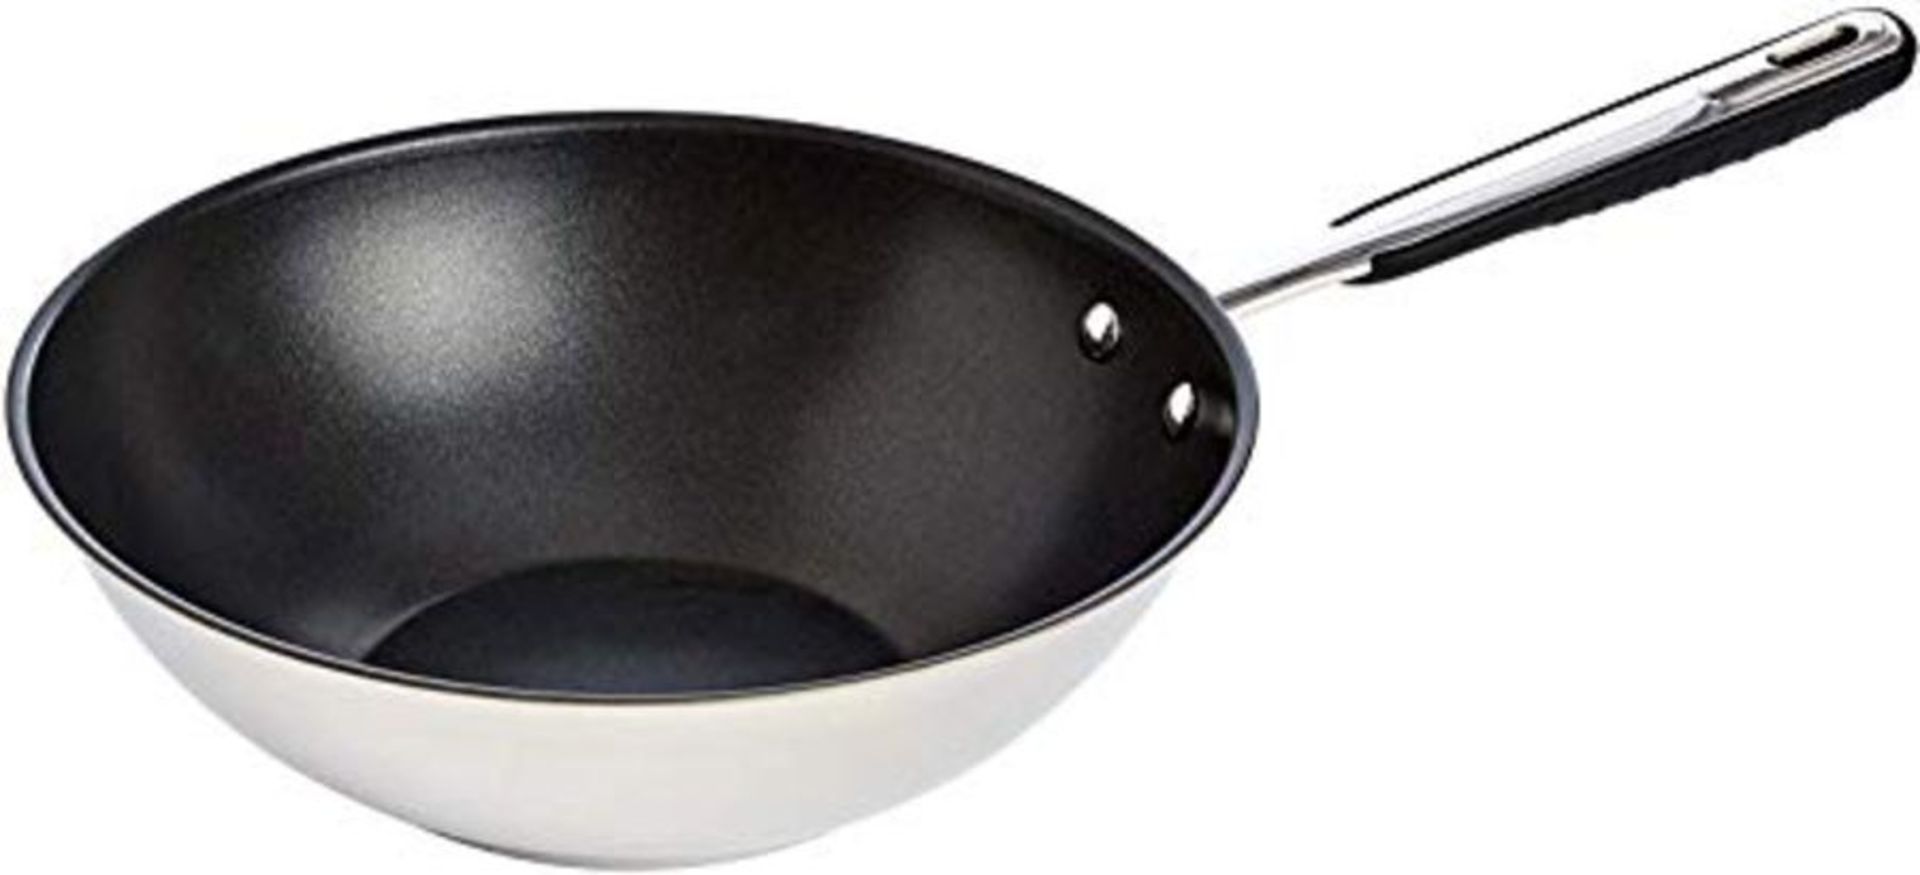 Amazon Basics Stainless Steel Induction Non Stick Wok Pan - with Soft Touch Handle, PF